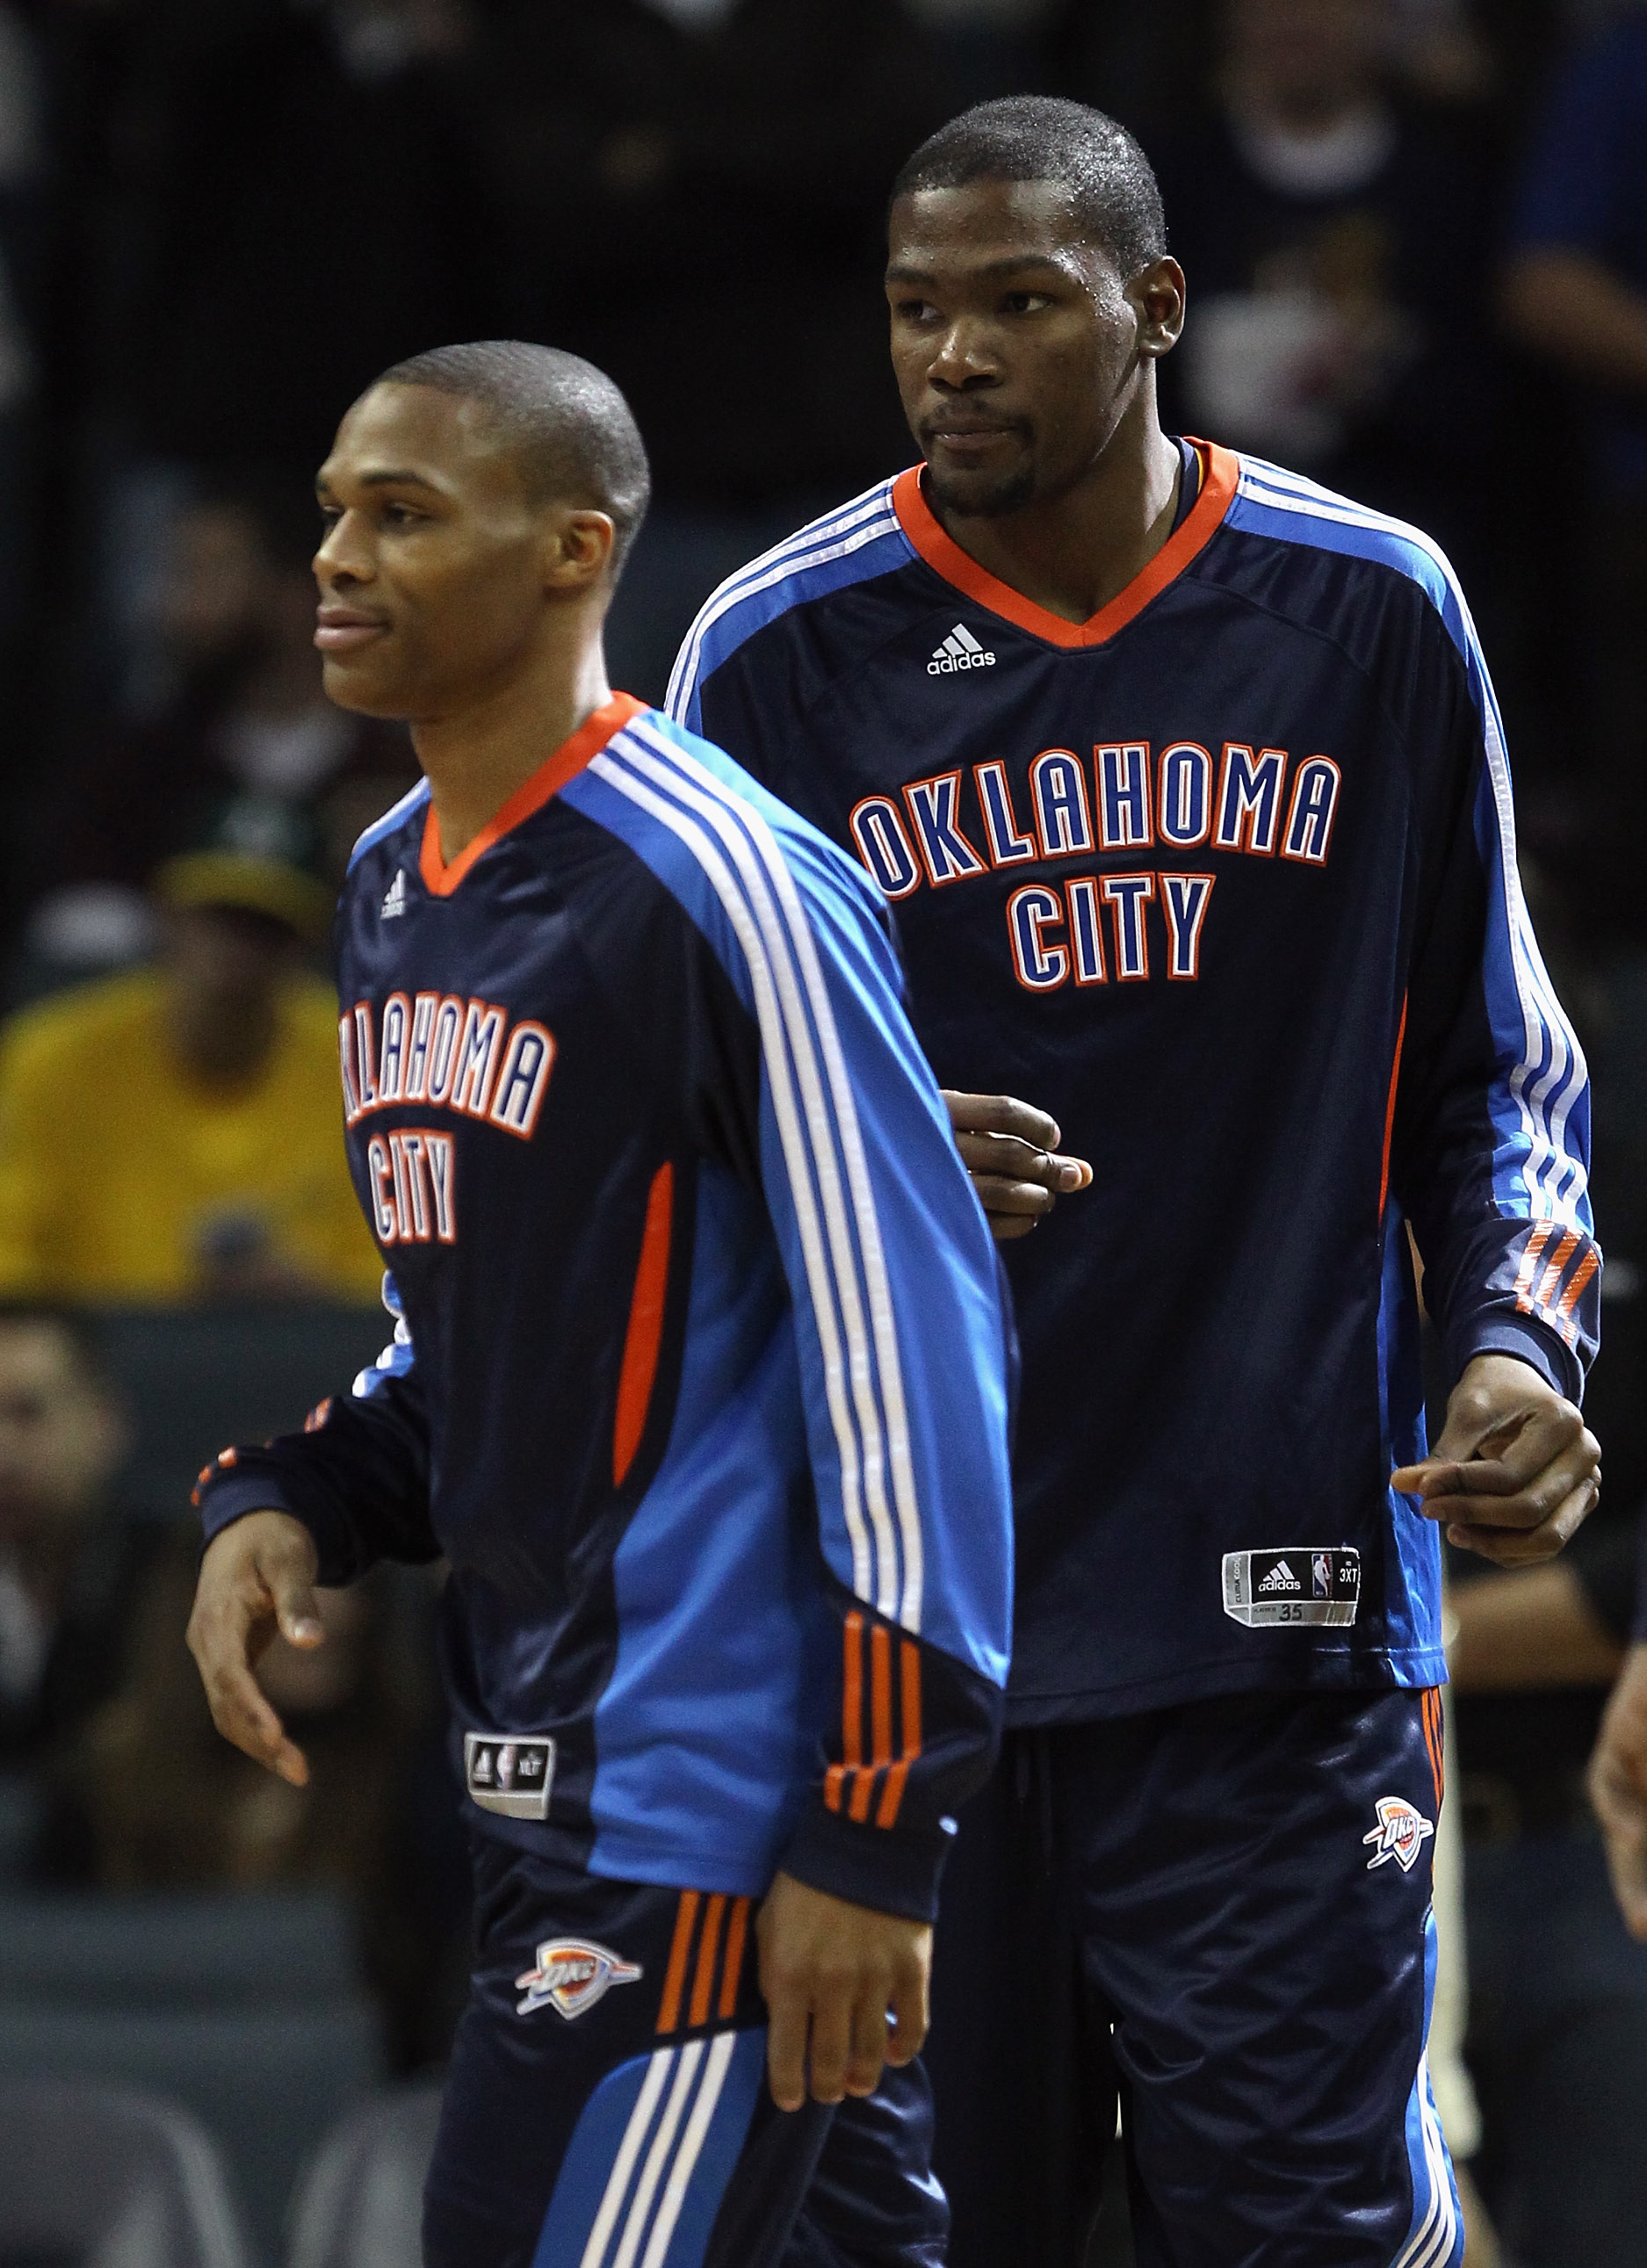 CHARLOTTE, NC - DECEMBER 21:  Teammates Kevin Durant #35 and Russell Westbrook #0 of the Oklahoma Thunder warmup before the start of their game against the Charlotte Bobcats at Time Warner Cable Arena on December 21, 2010 in Charlotte, North Carolina. NOT